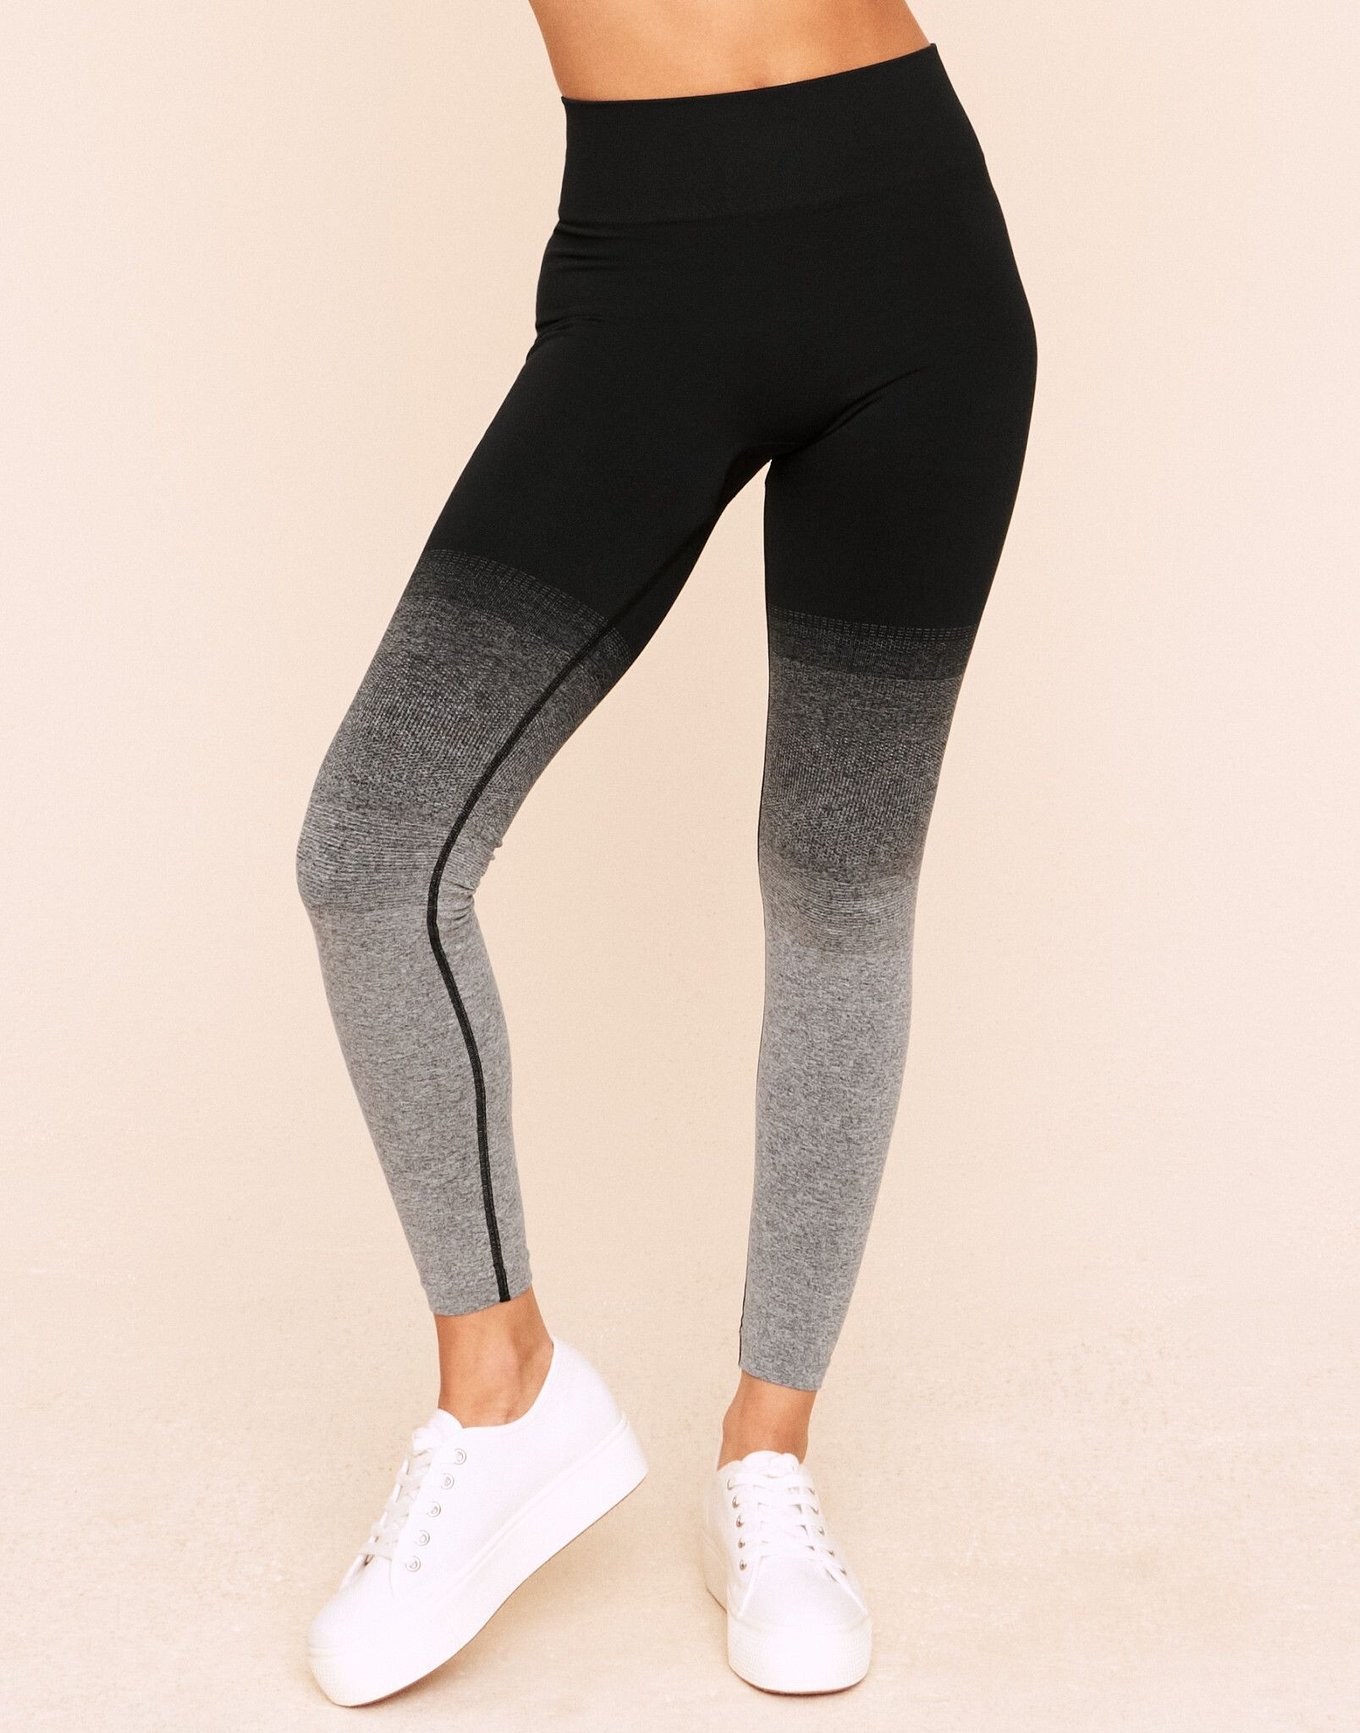 Grey, green and white sports leggings - CLAIRE Waist S Colour  Grey-white-green Waist S Colour Grey-white-green